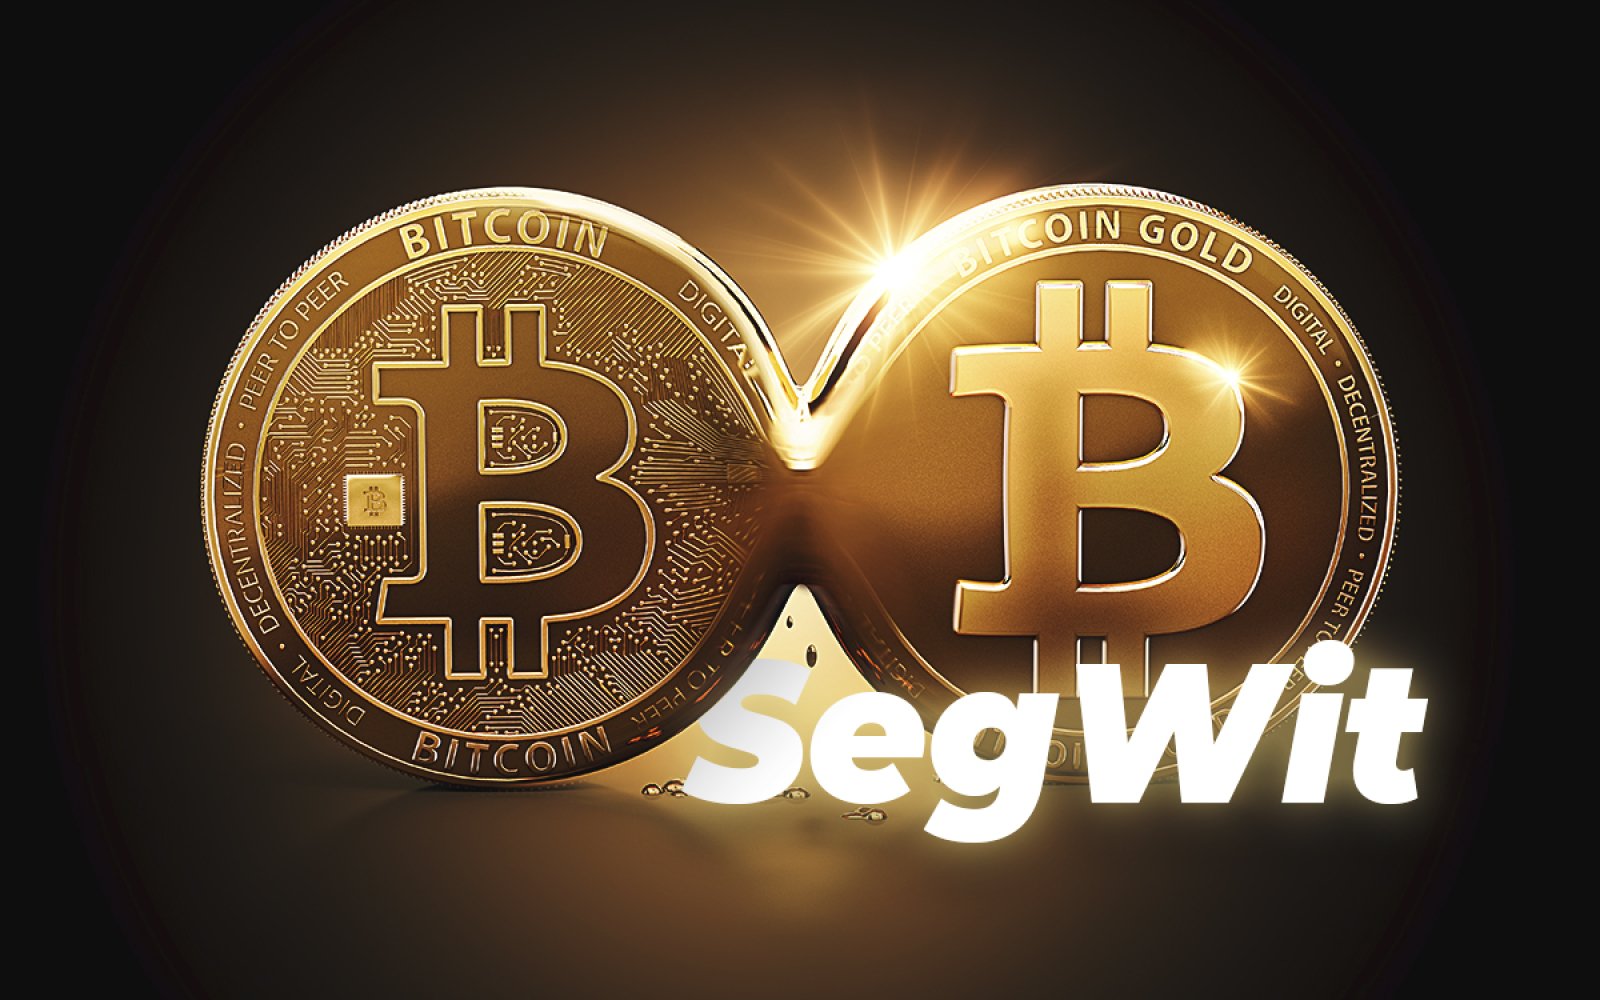 Every Major Litecoin Mining Pool now Signals SegWit | Bitcoin Insider